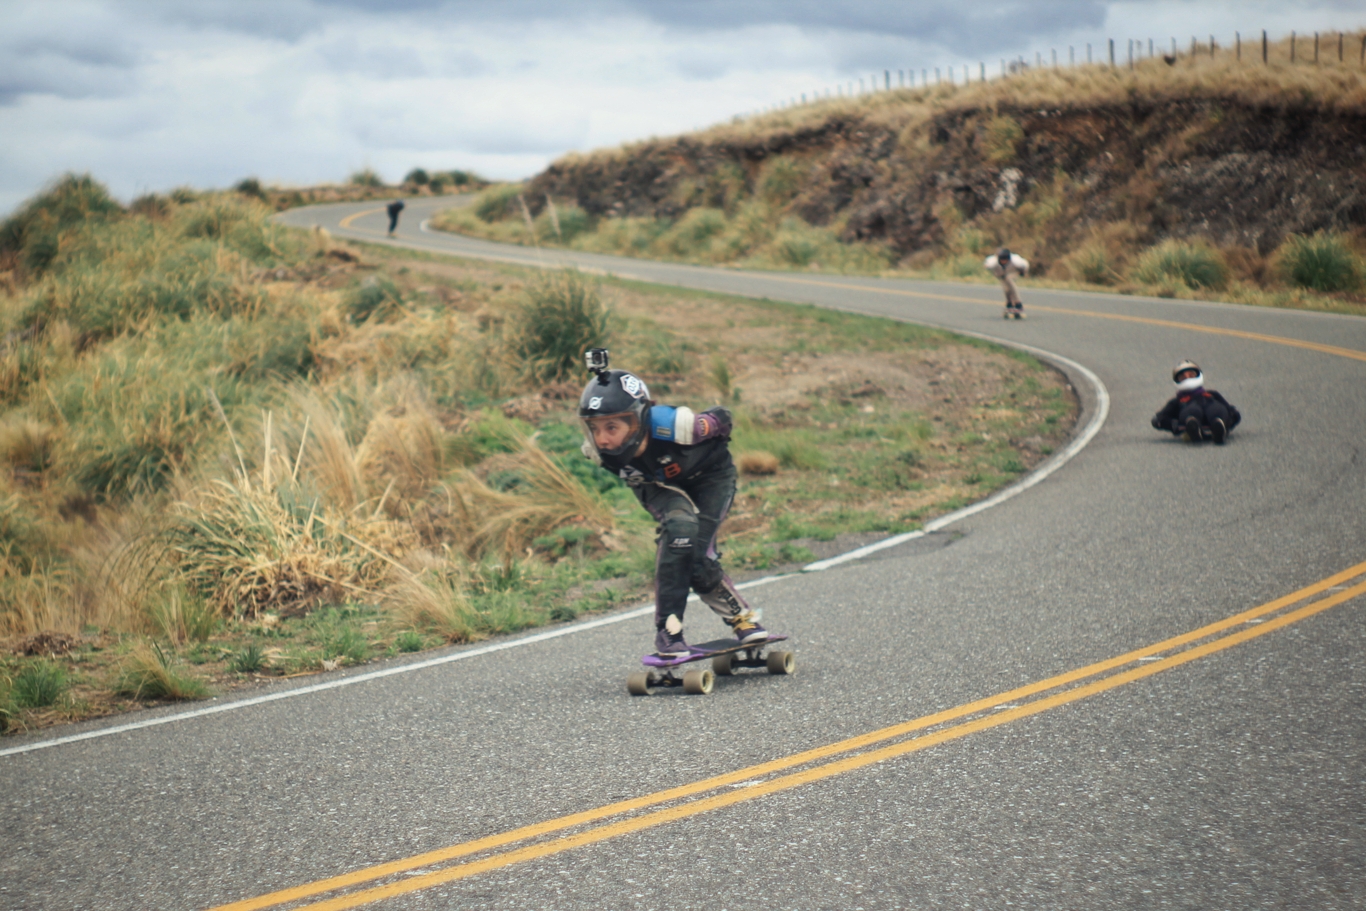 longboard girls crew, longboard, longboarding, skate, skateboarding, cool, rad, strong, awesome, photo, girl, power, sea, summer, amazing photo, nose manual, girls who shred, girls who skate, lgc, friends, fun, skate like a girl, women supporting women, goals, beautiful, action, action sports, sport, women in sport, game changers, ride, female rider, athlete, girlboss, lean in, women unite, equality, balance, gender, gender equality, board, boards, sun, longboard girl, longboard girls, boards, skater girl, skater girls, fashion, love, freeride, downhill, dancing, friendship, friends, be the change, work for change, downhill skateboarding, longboardgirls, longboardgirl, longboardgirlscrew, skatergirl, empowering women, female empowerment, women empowerment, longboarddancing, downhillskateboarding, LGBT, California, mujeres longboarders, mujeres, empoderamiento femenino, chicas longboarders, amigas, deportes extremos, igualdad, género, deporte, tablas, mujeres y tablas, chicas y tablas, atletas, Verano, argentina, Lgc argentina, SHE RIDE, copina, Cordoba 